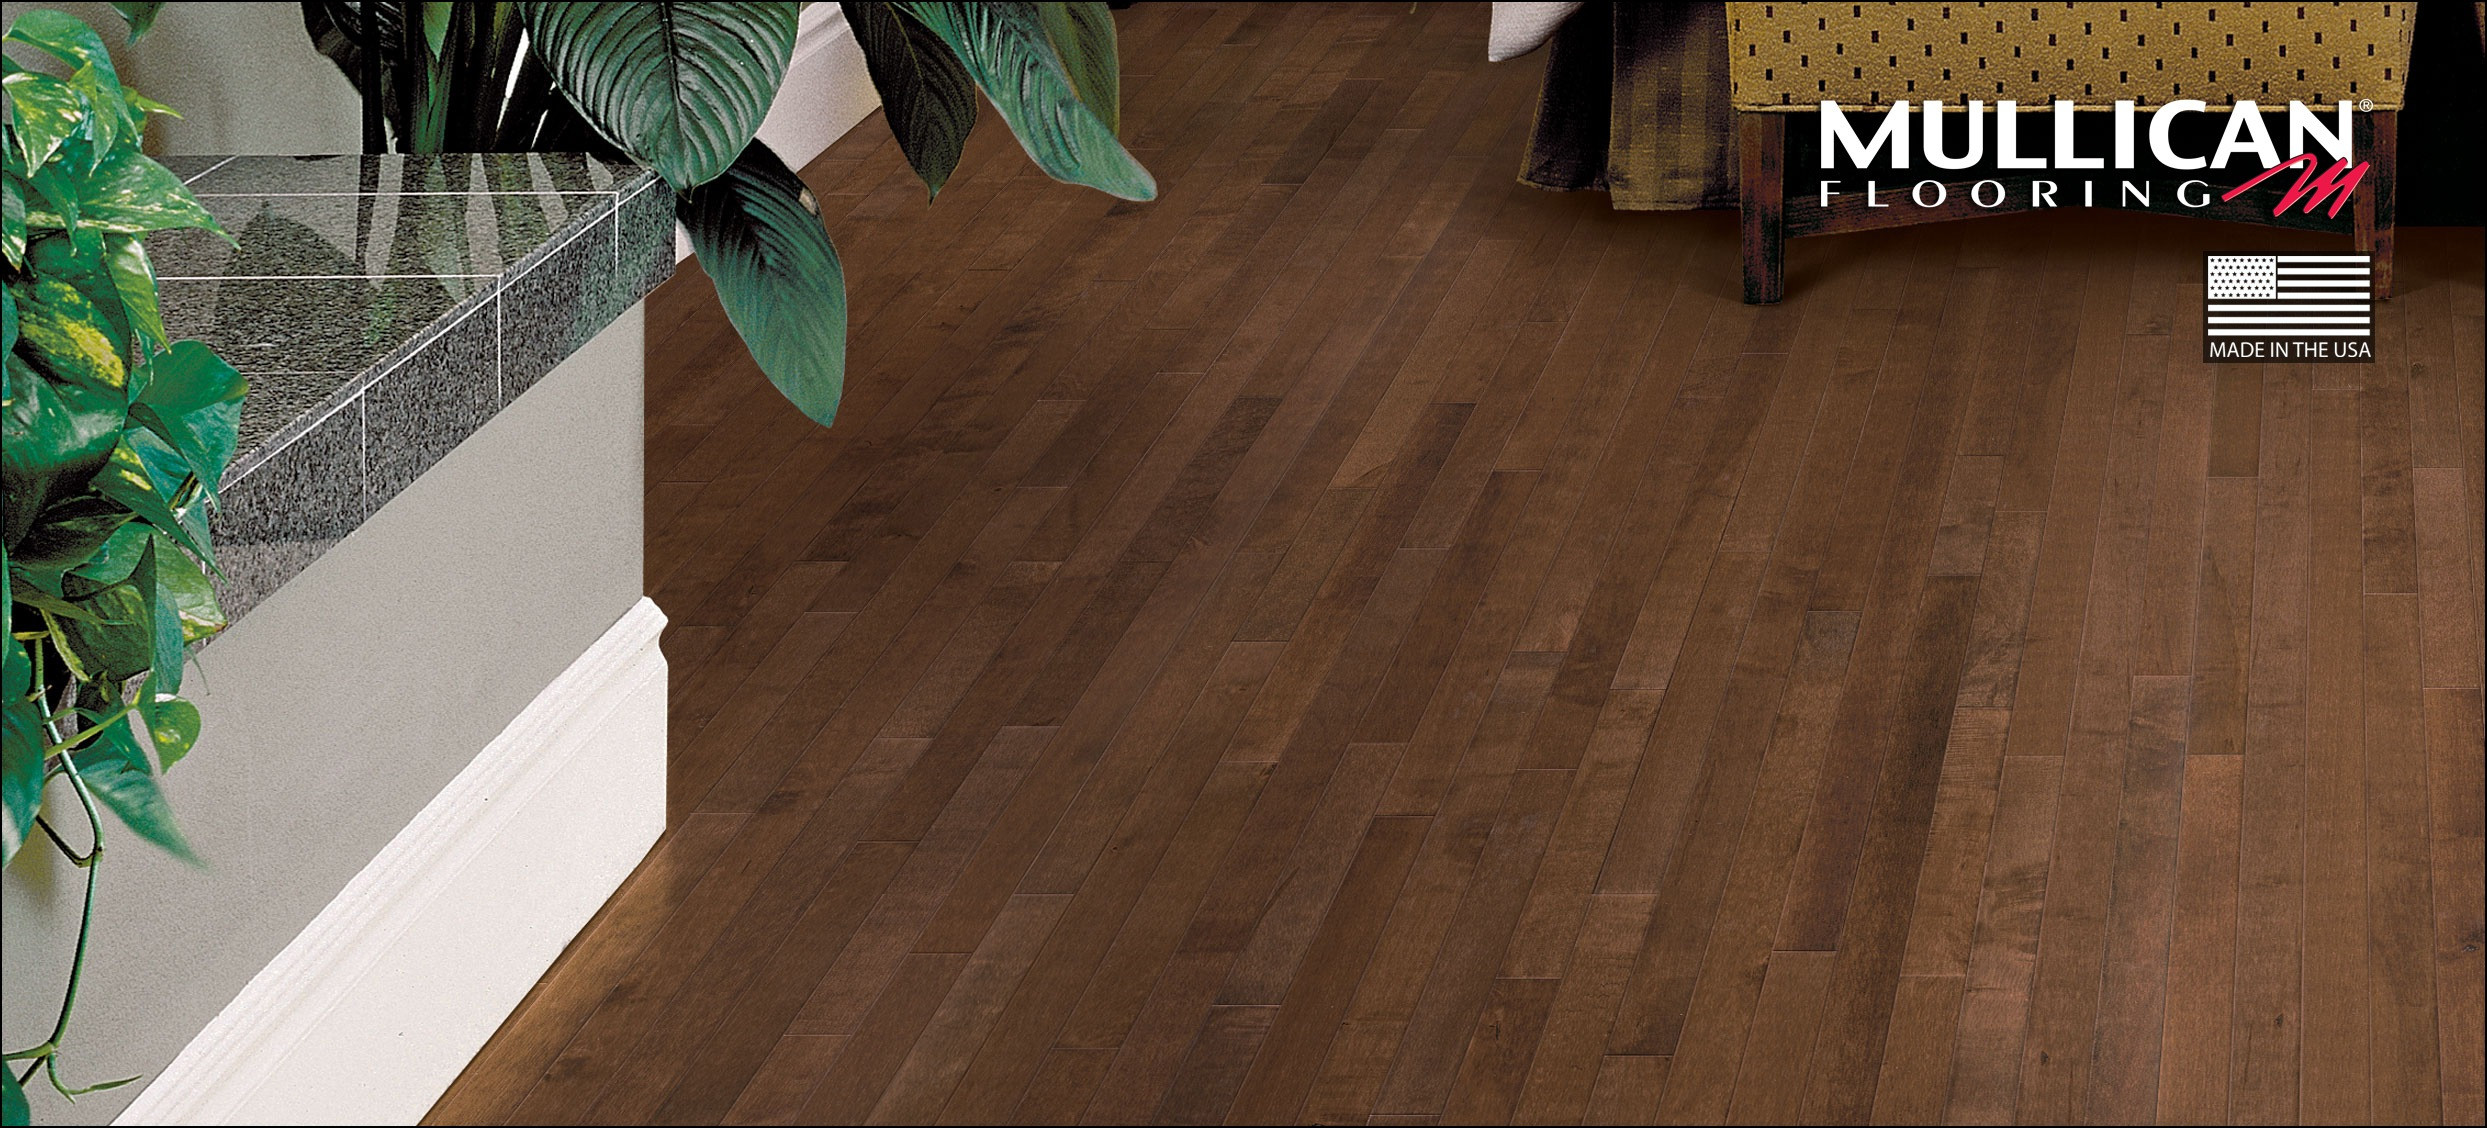 16 Stylish Grey Hardwood Floors Lowes 2022 free download grey hardwood floors lowes of wide plank flooring ideas intended for wide plank wood flooring lowes photographies mullican flooring home of wide plank wood flooring lowes